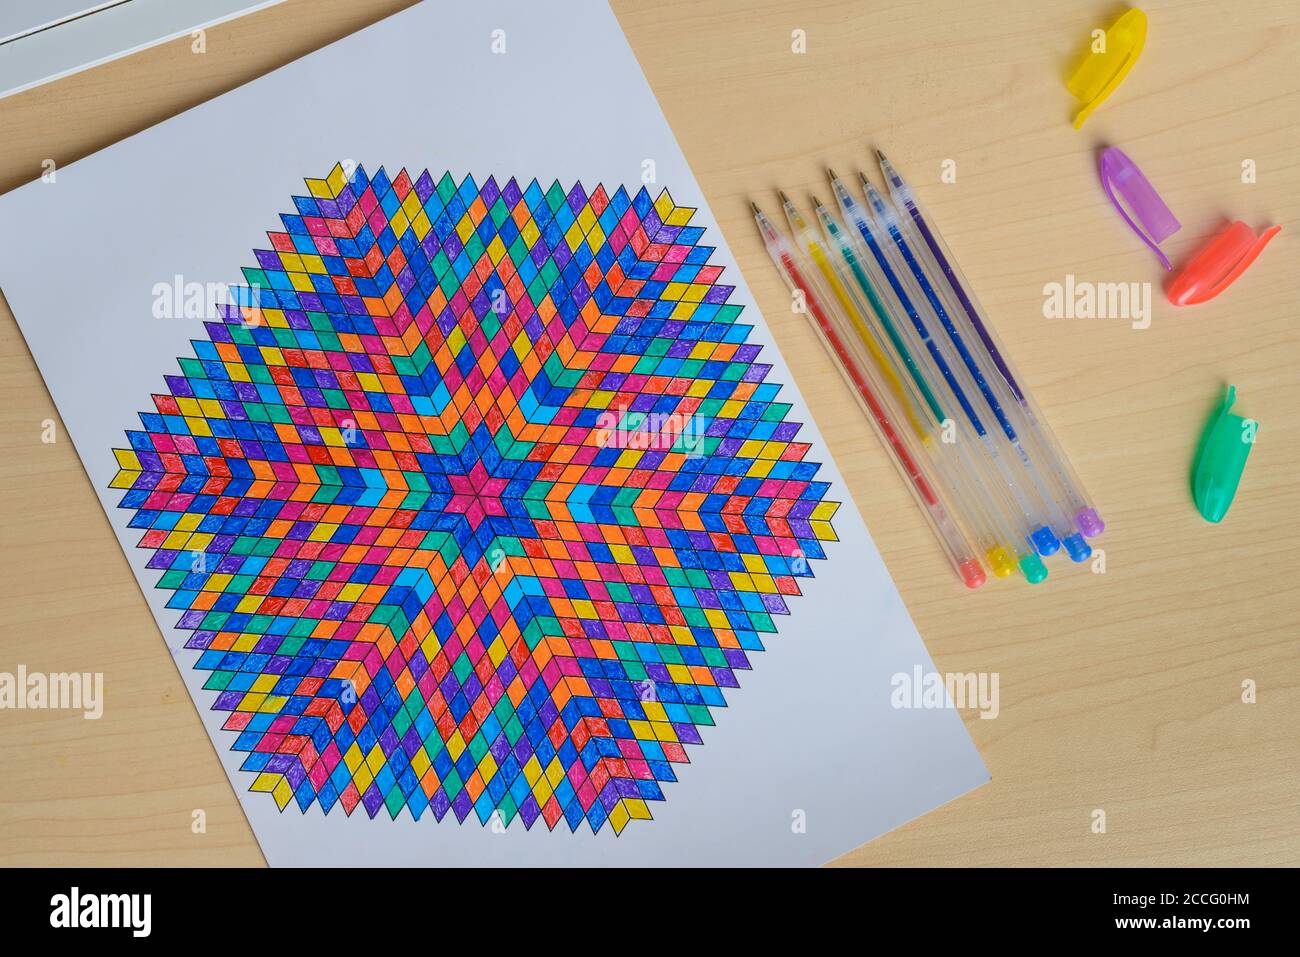 Mandala Coloring Therapy. Mandala creative drawing. Relaxation and stress relief, filling the picture with energy. Master class. Art Therapy. Mandala Stock Photo